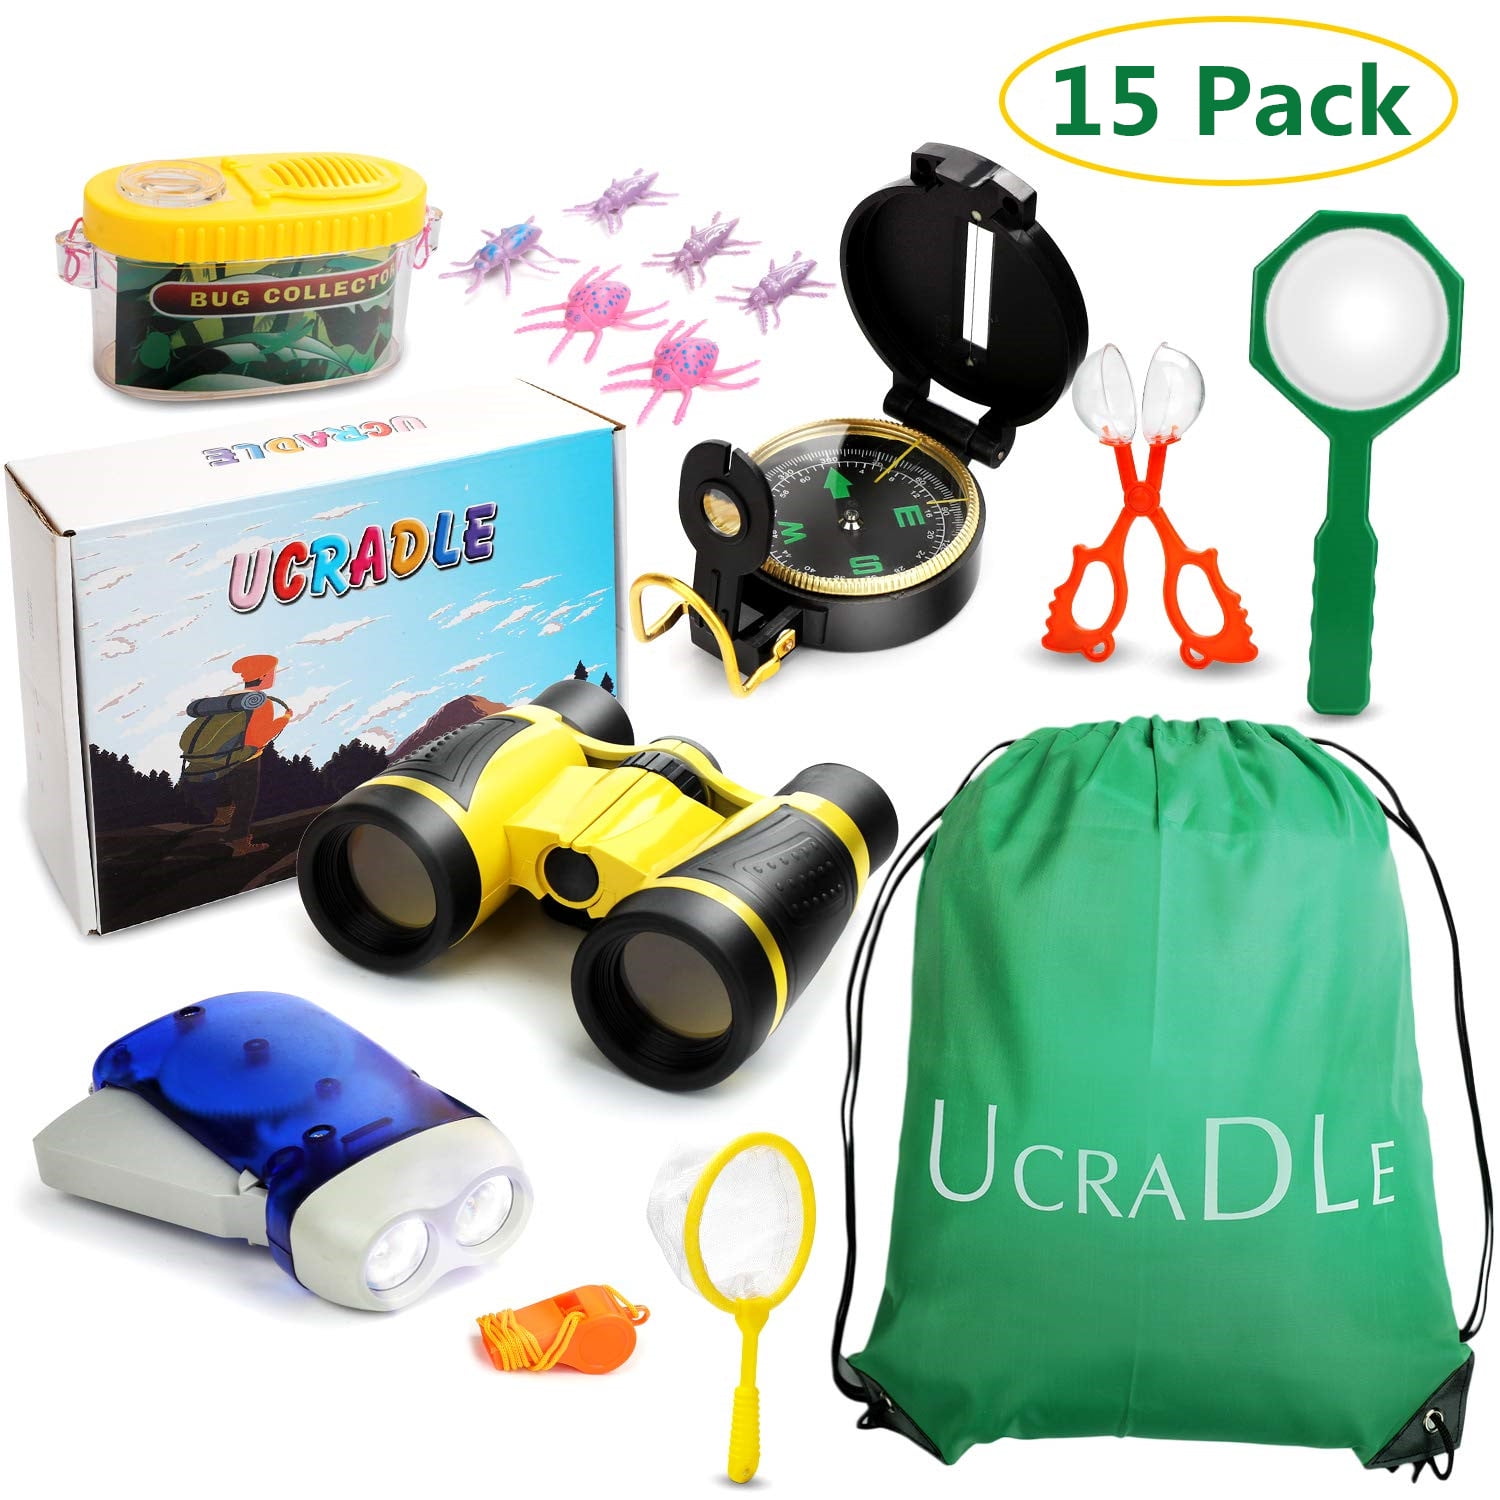 Outdoor Toys for Kids 11 in 1 Adventure Kids Outside Children Exploration Kit Binoculars Flashlight Compass Whistle Magnifying Glass Tweezers Bug Container Spider Backpack Birthday Gift for Boy Girl 